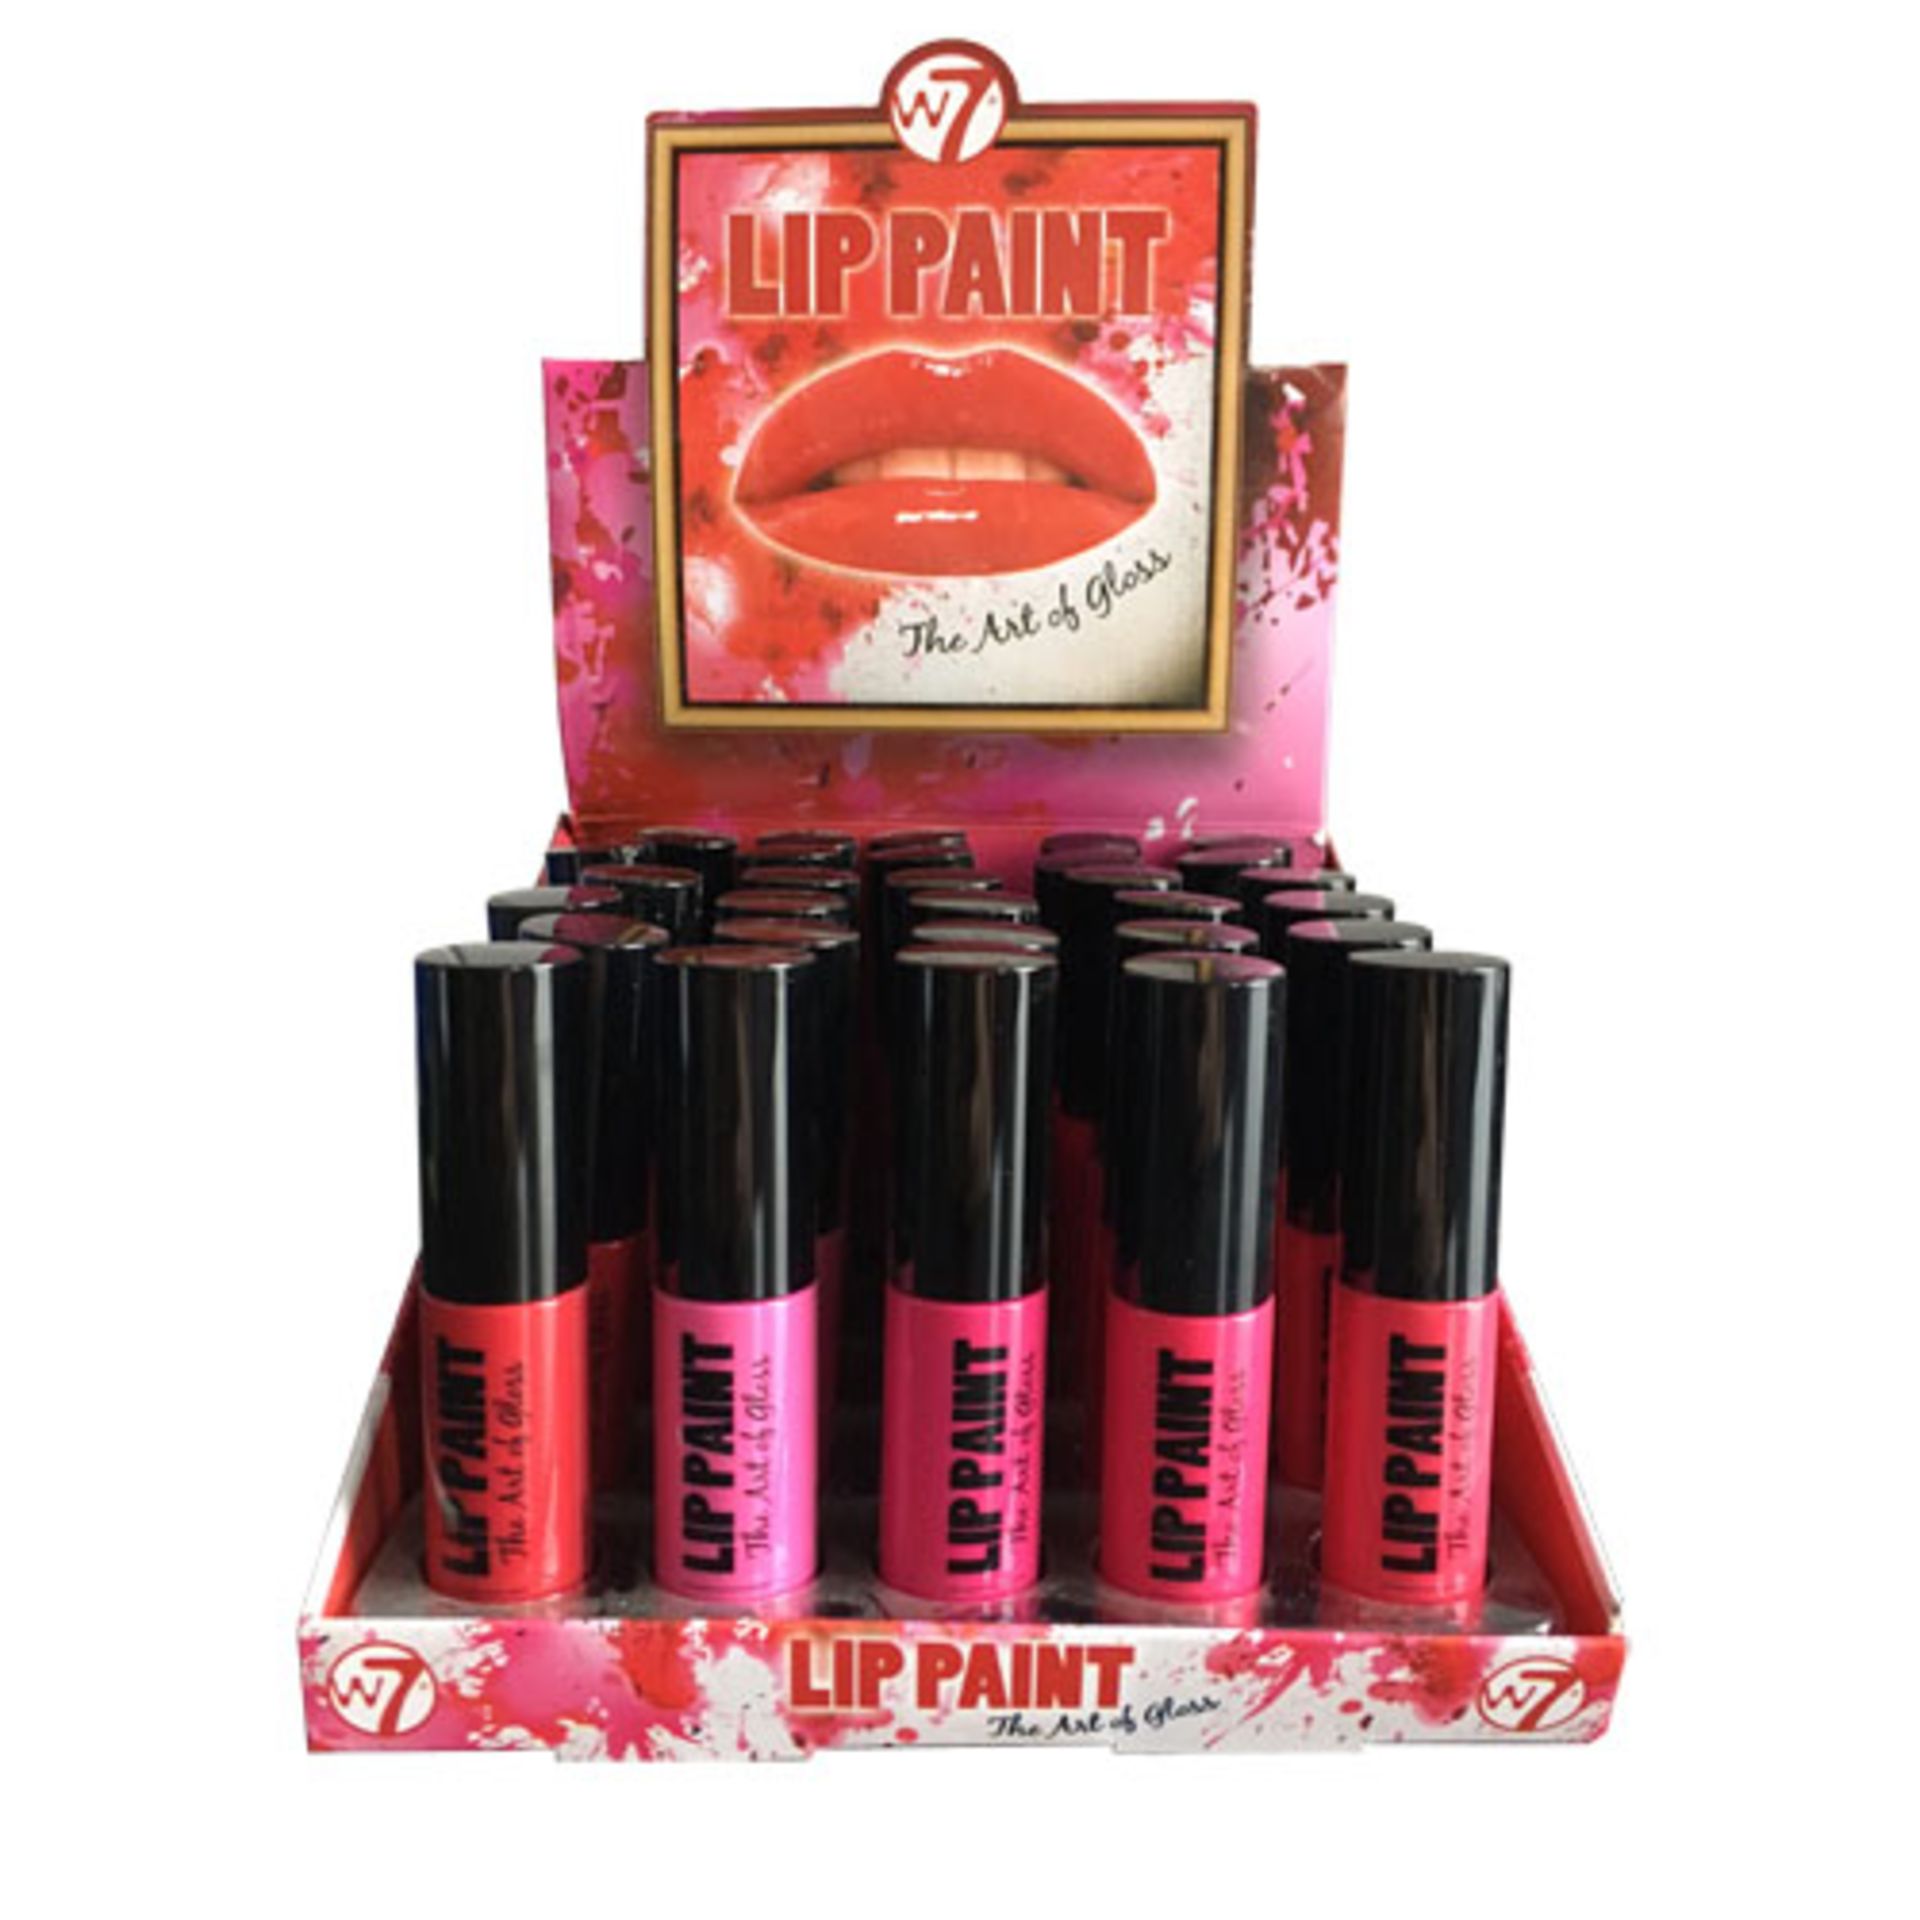 288 w7 Lip Paint – in Retail Displays – 5 Shades – NO VATUK Delivery £15